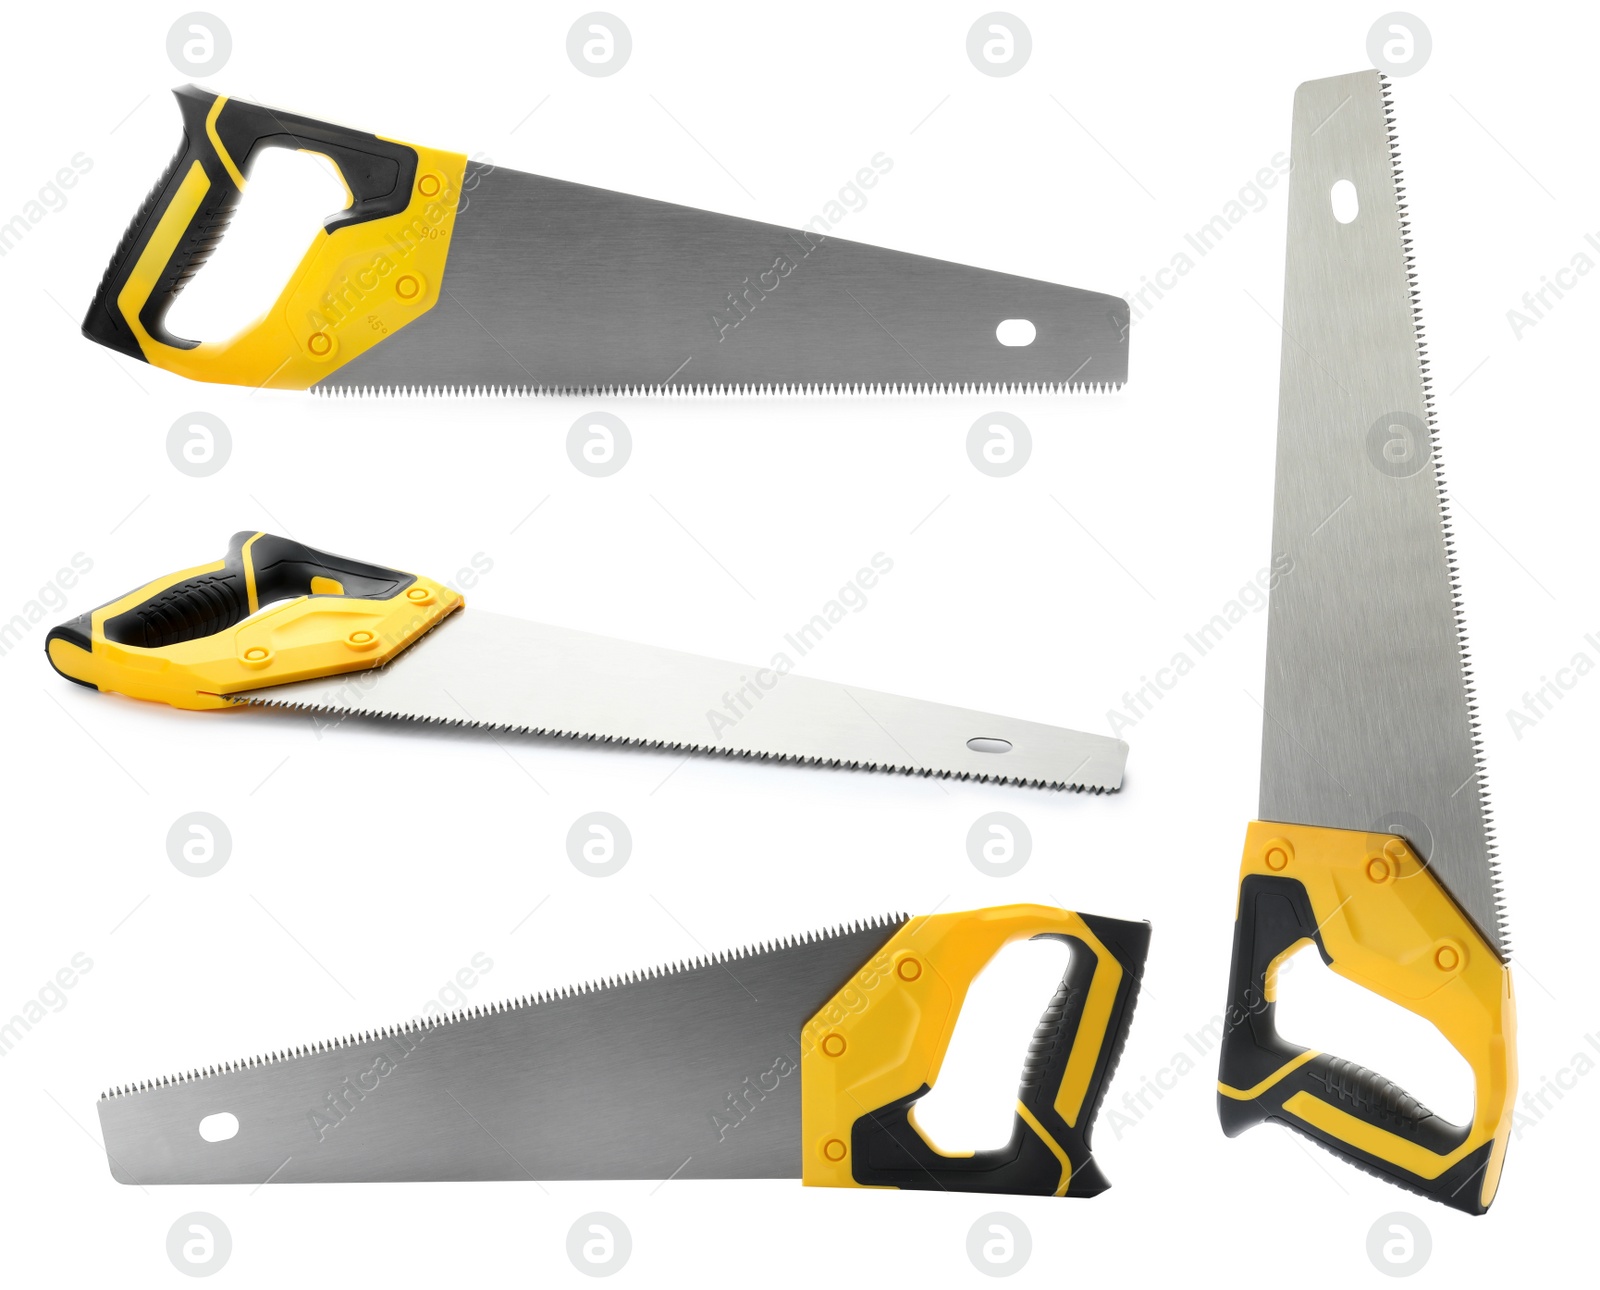 Image of Collage with hand saws on white background. Carpenter's tools